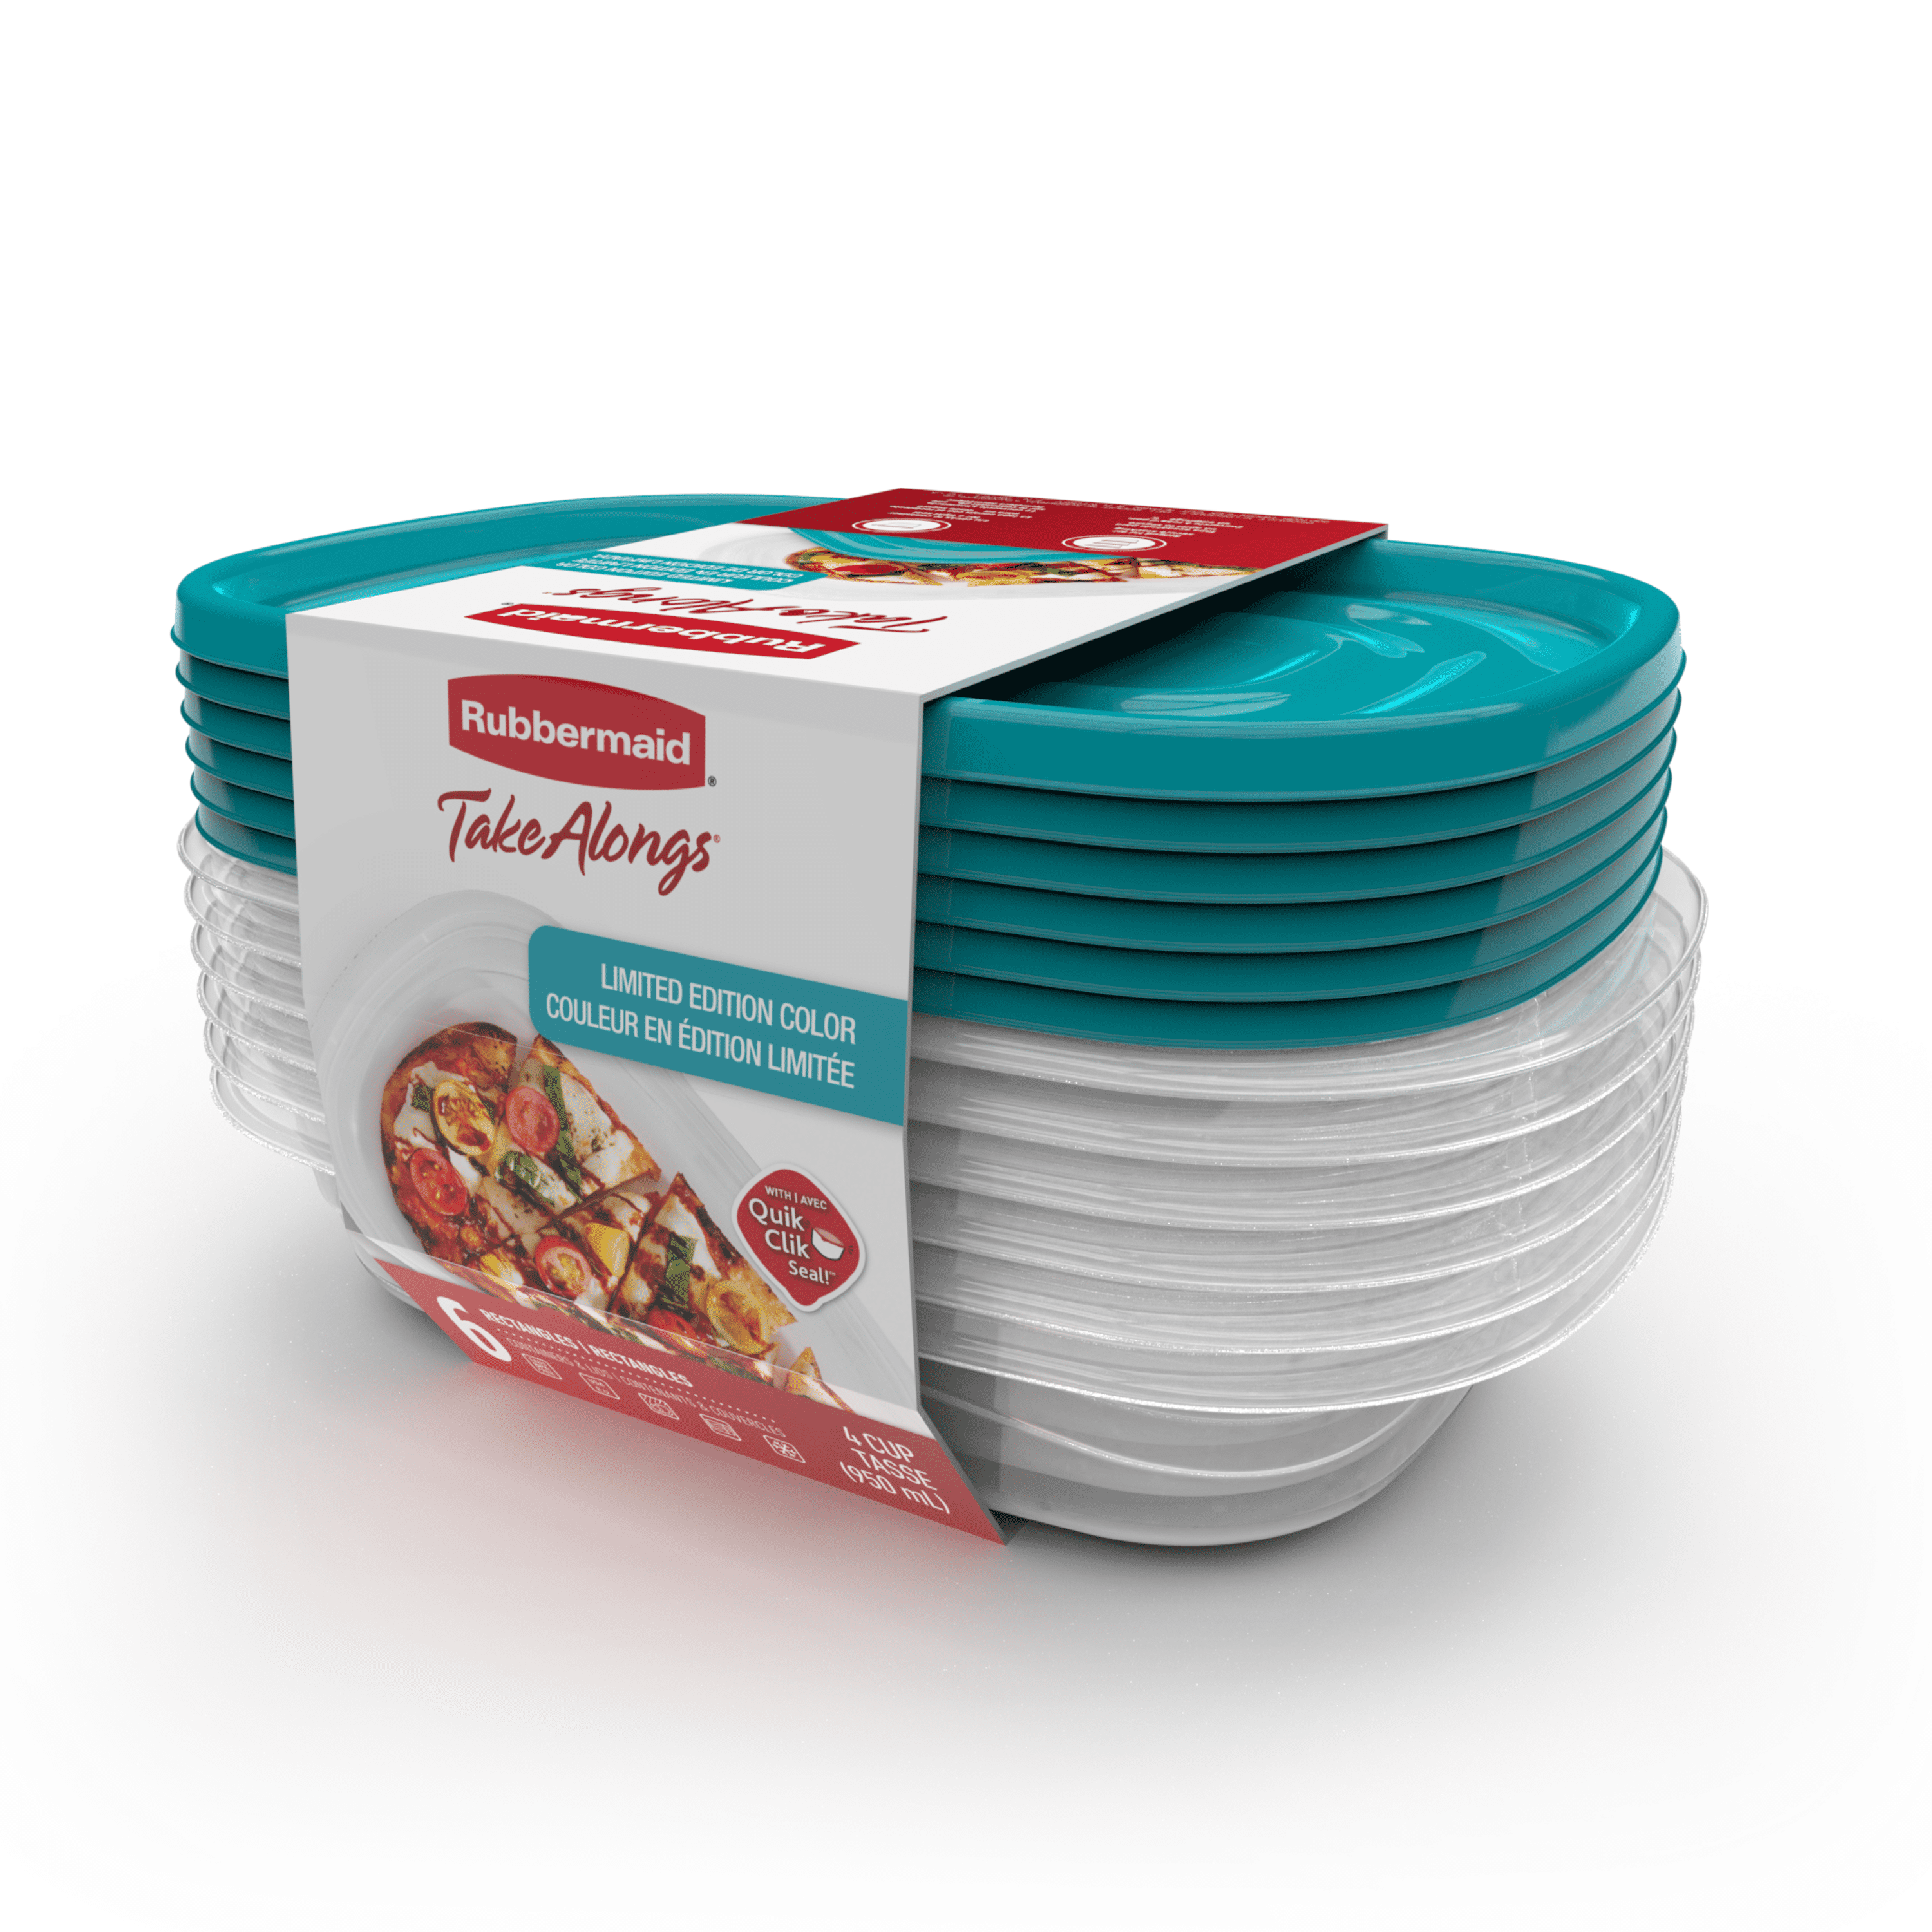 Rubbermaid Containers 4 ea, Shop